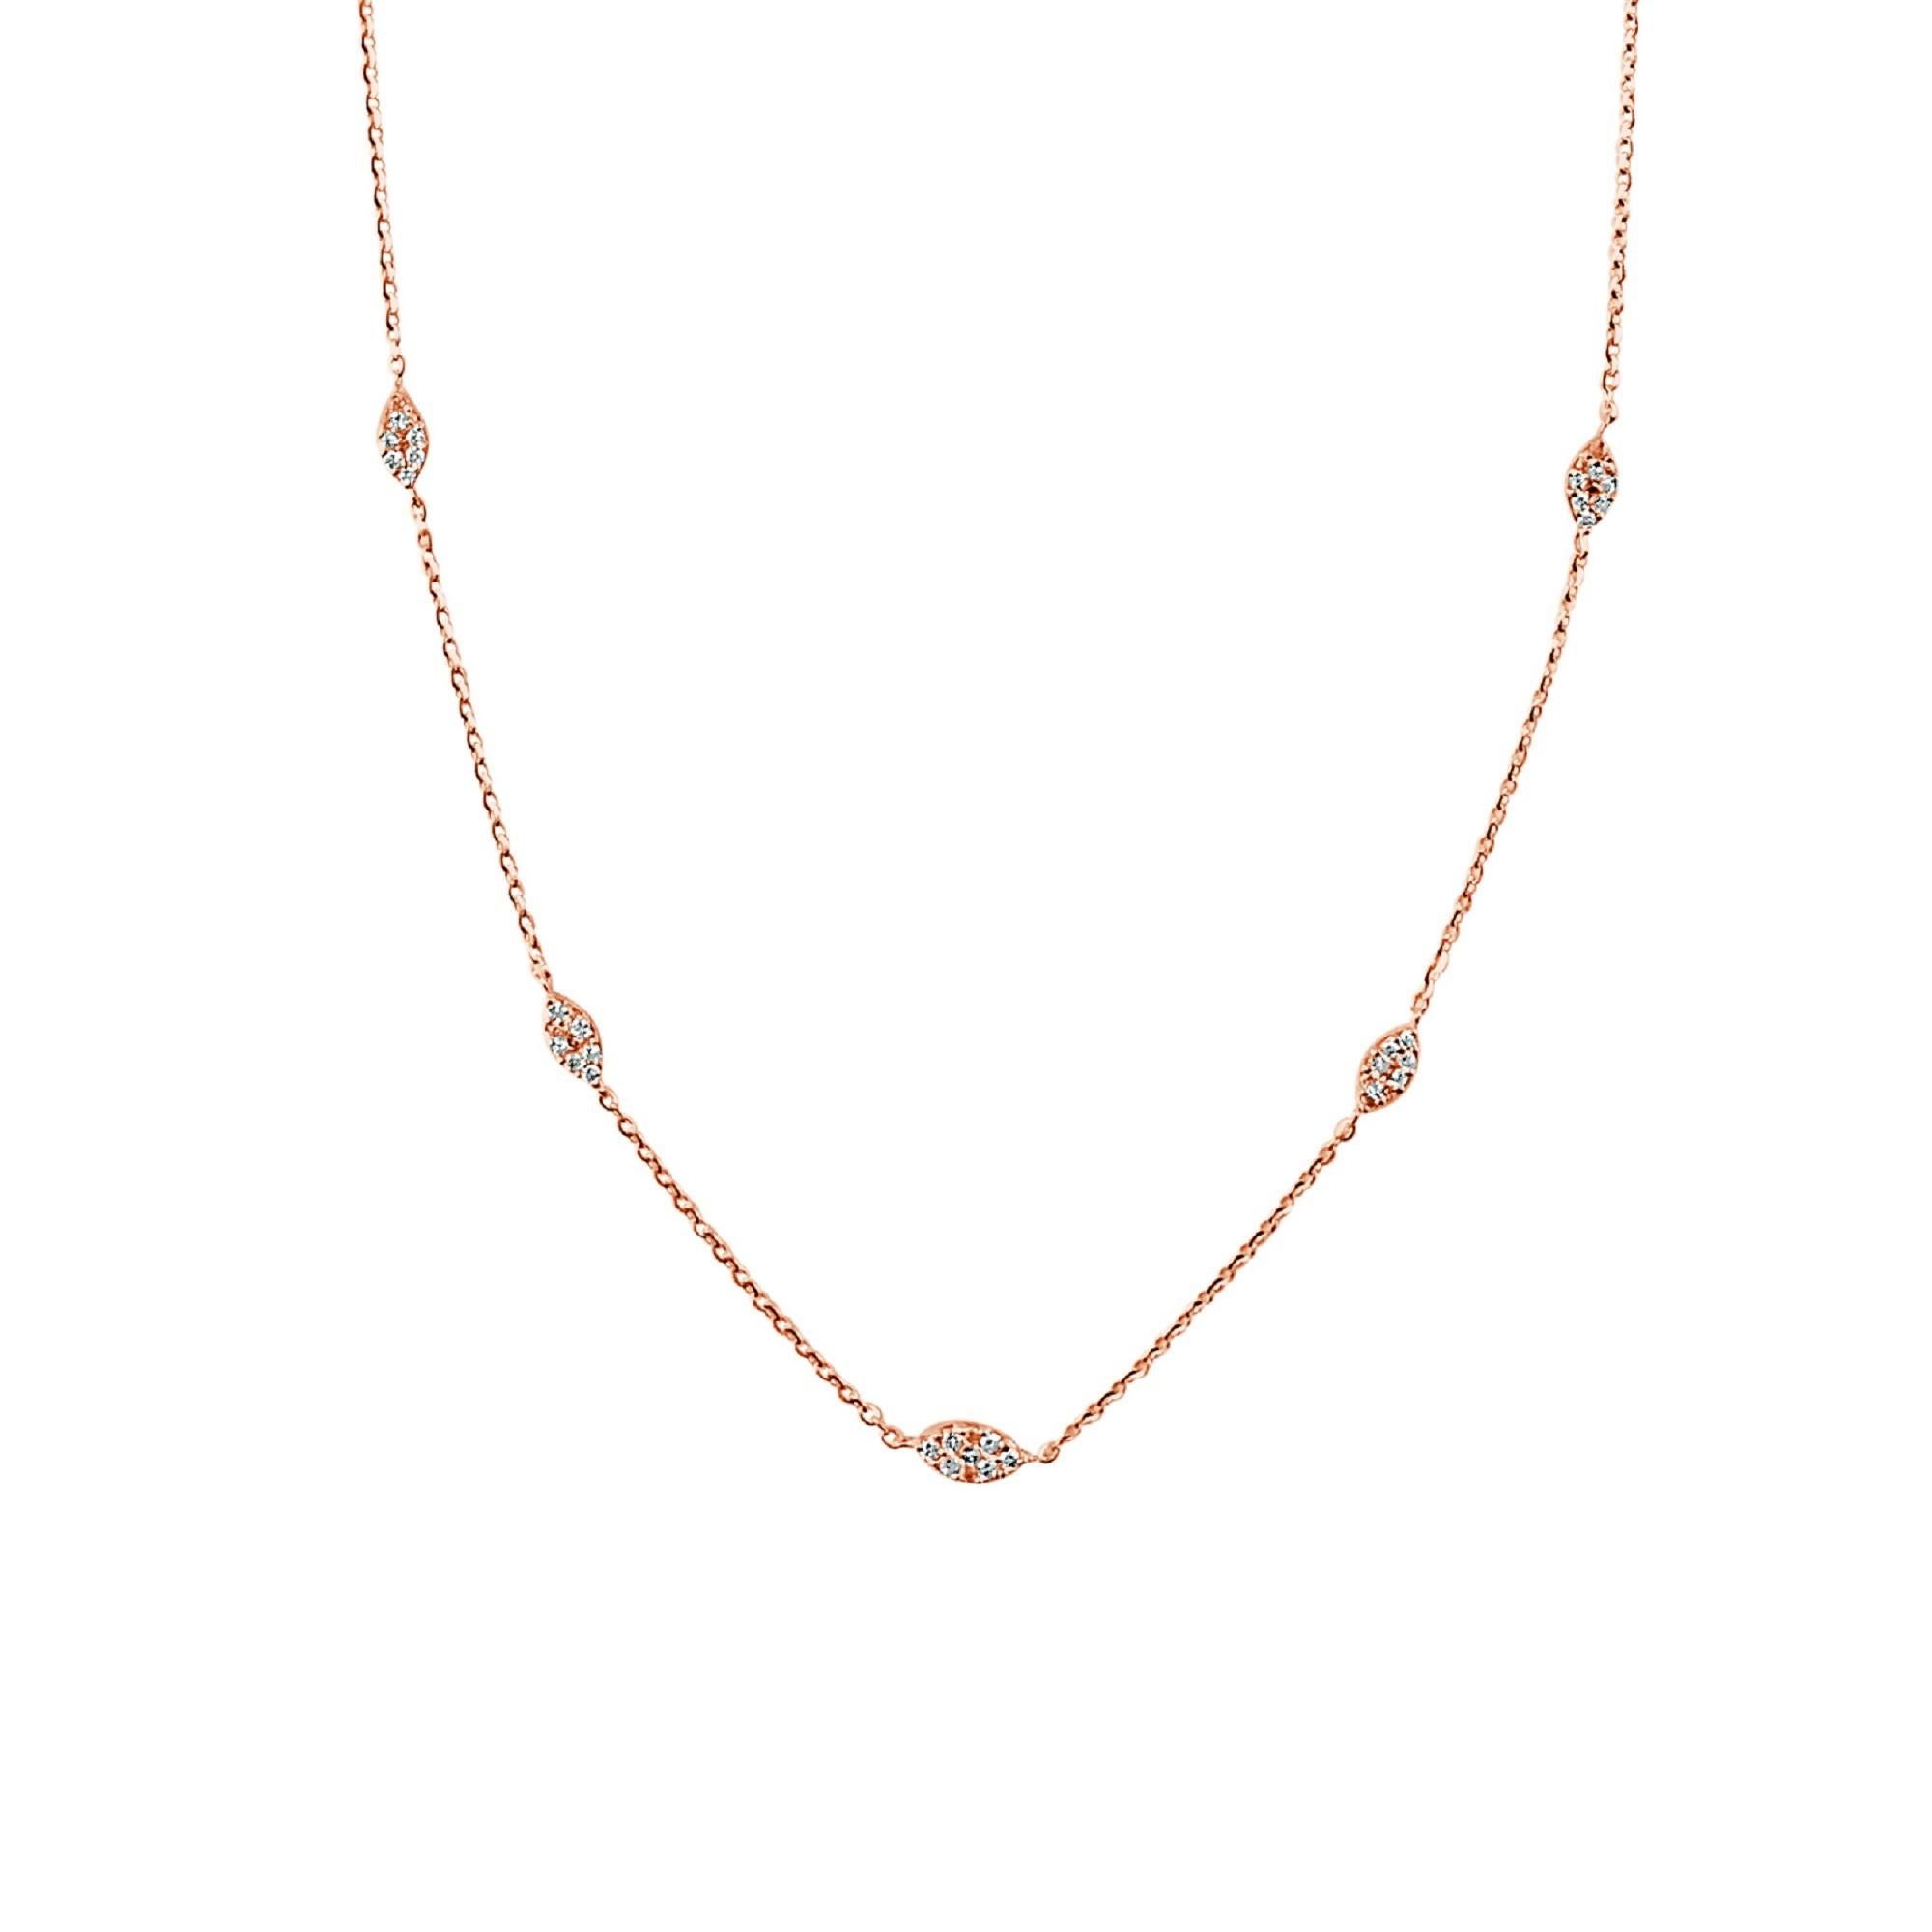 Graceful marquise shaped stations of diamonds set in 14k gold with cable chains between each form this lovely necklace for her. The 18-inch necklace has a total diamond weight of approximately 0.30 carat, and secures with a lobster clasp. Diamond